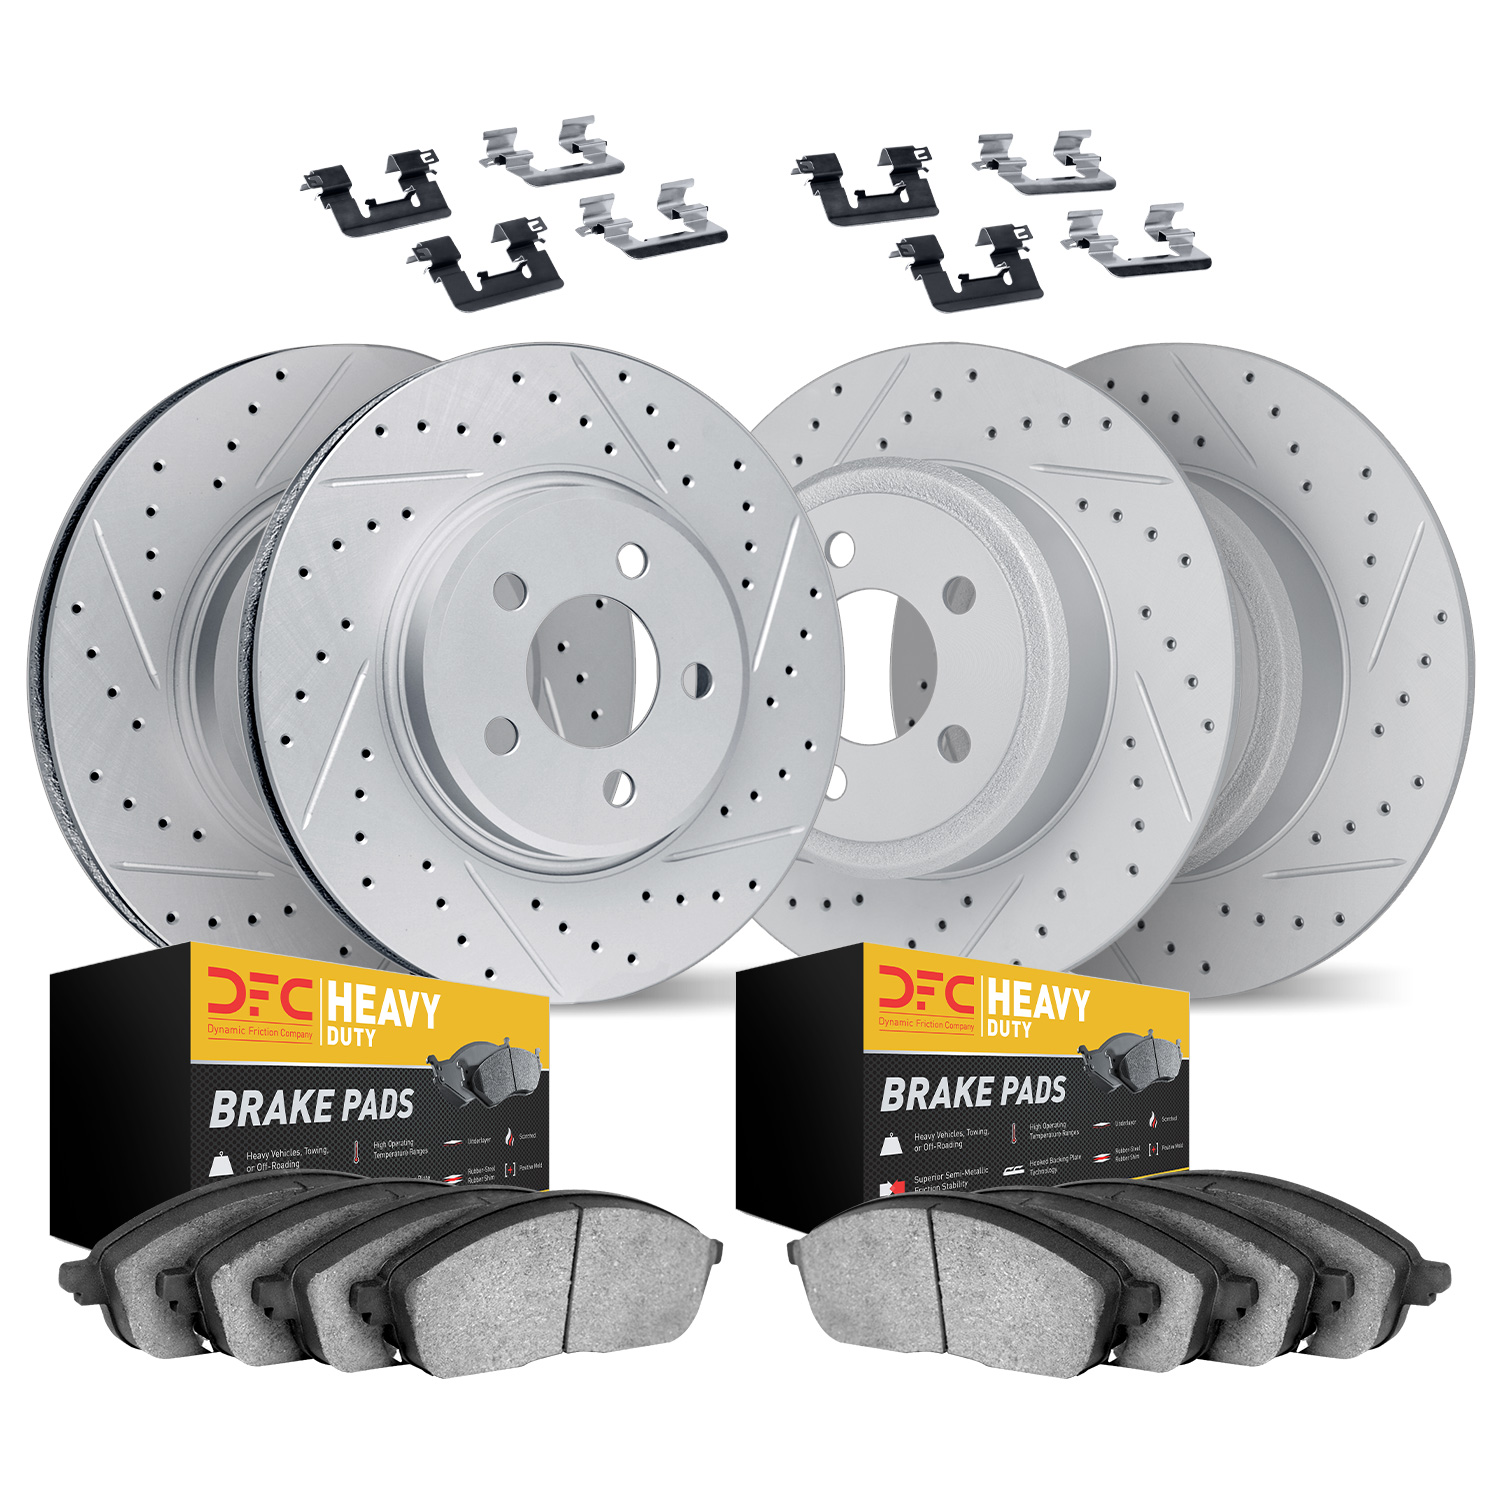 2214-99044 Geoperformance Drilled/Slotted Rotors w/Heavy-Duty Pads Kit & Hardware, 1997-2004 Ford/Lincoln/Mercury/Mazda, Positio